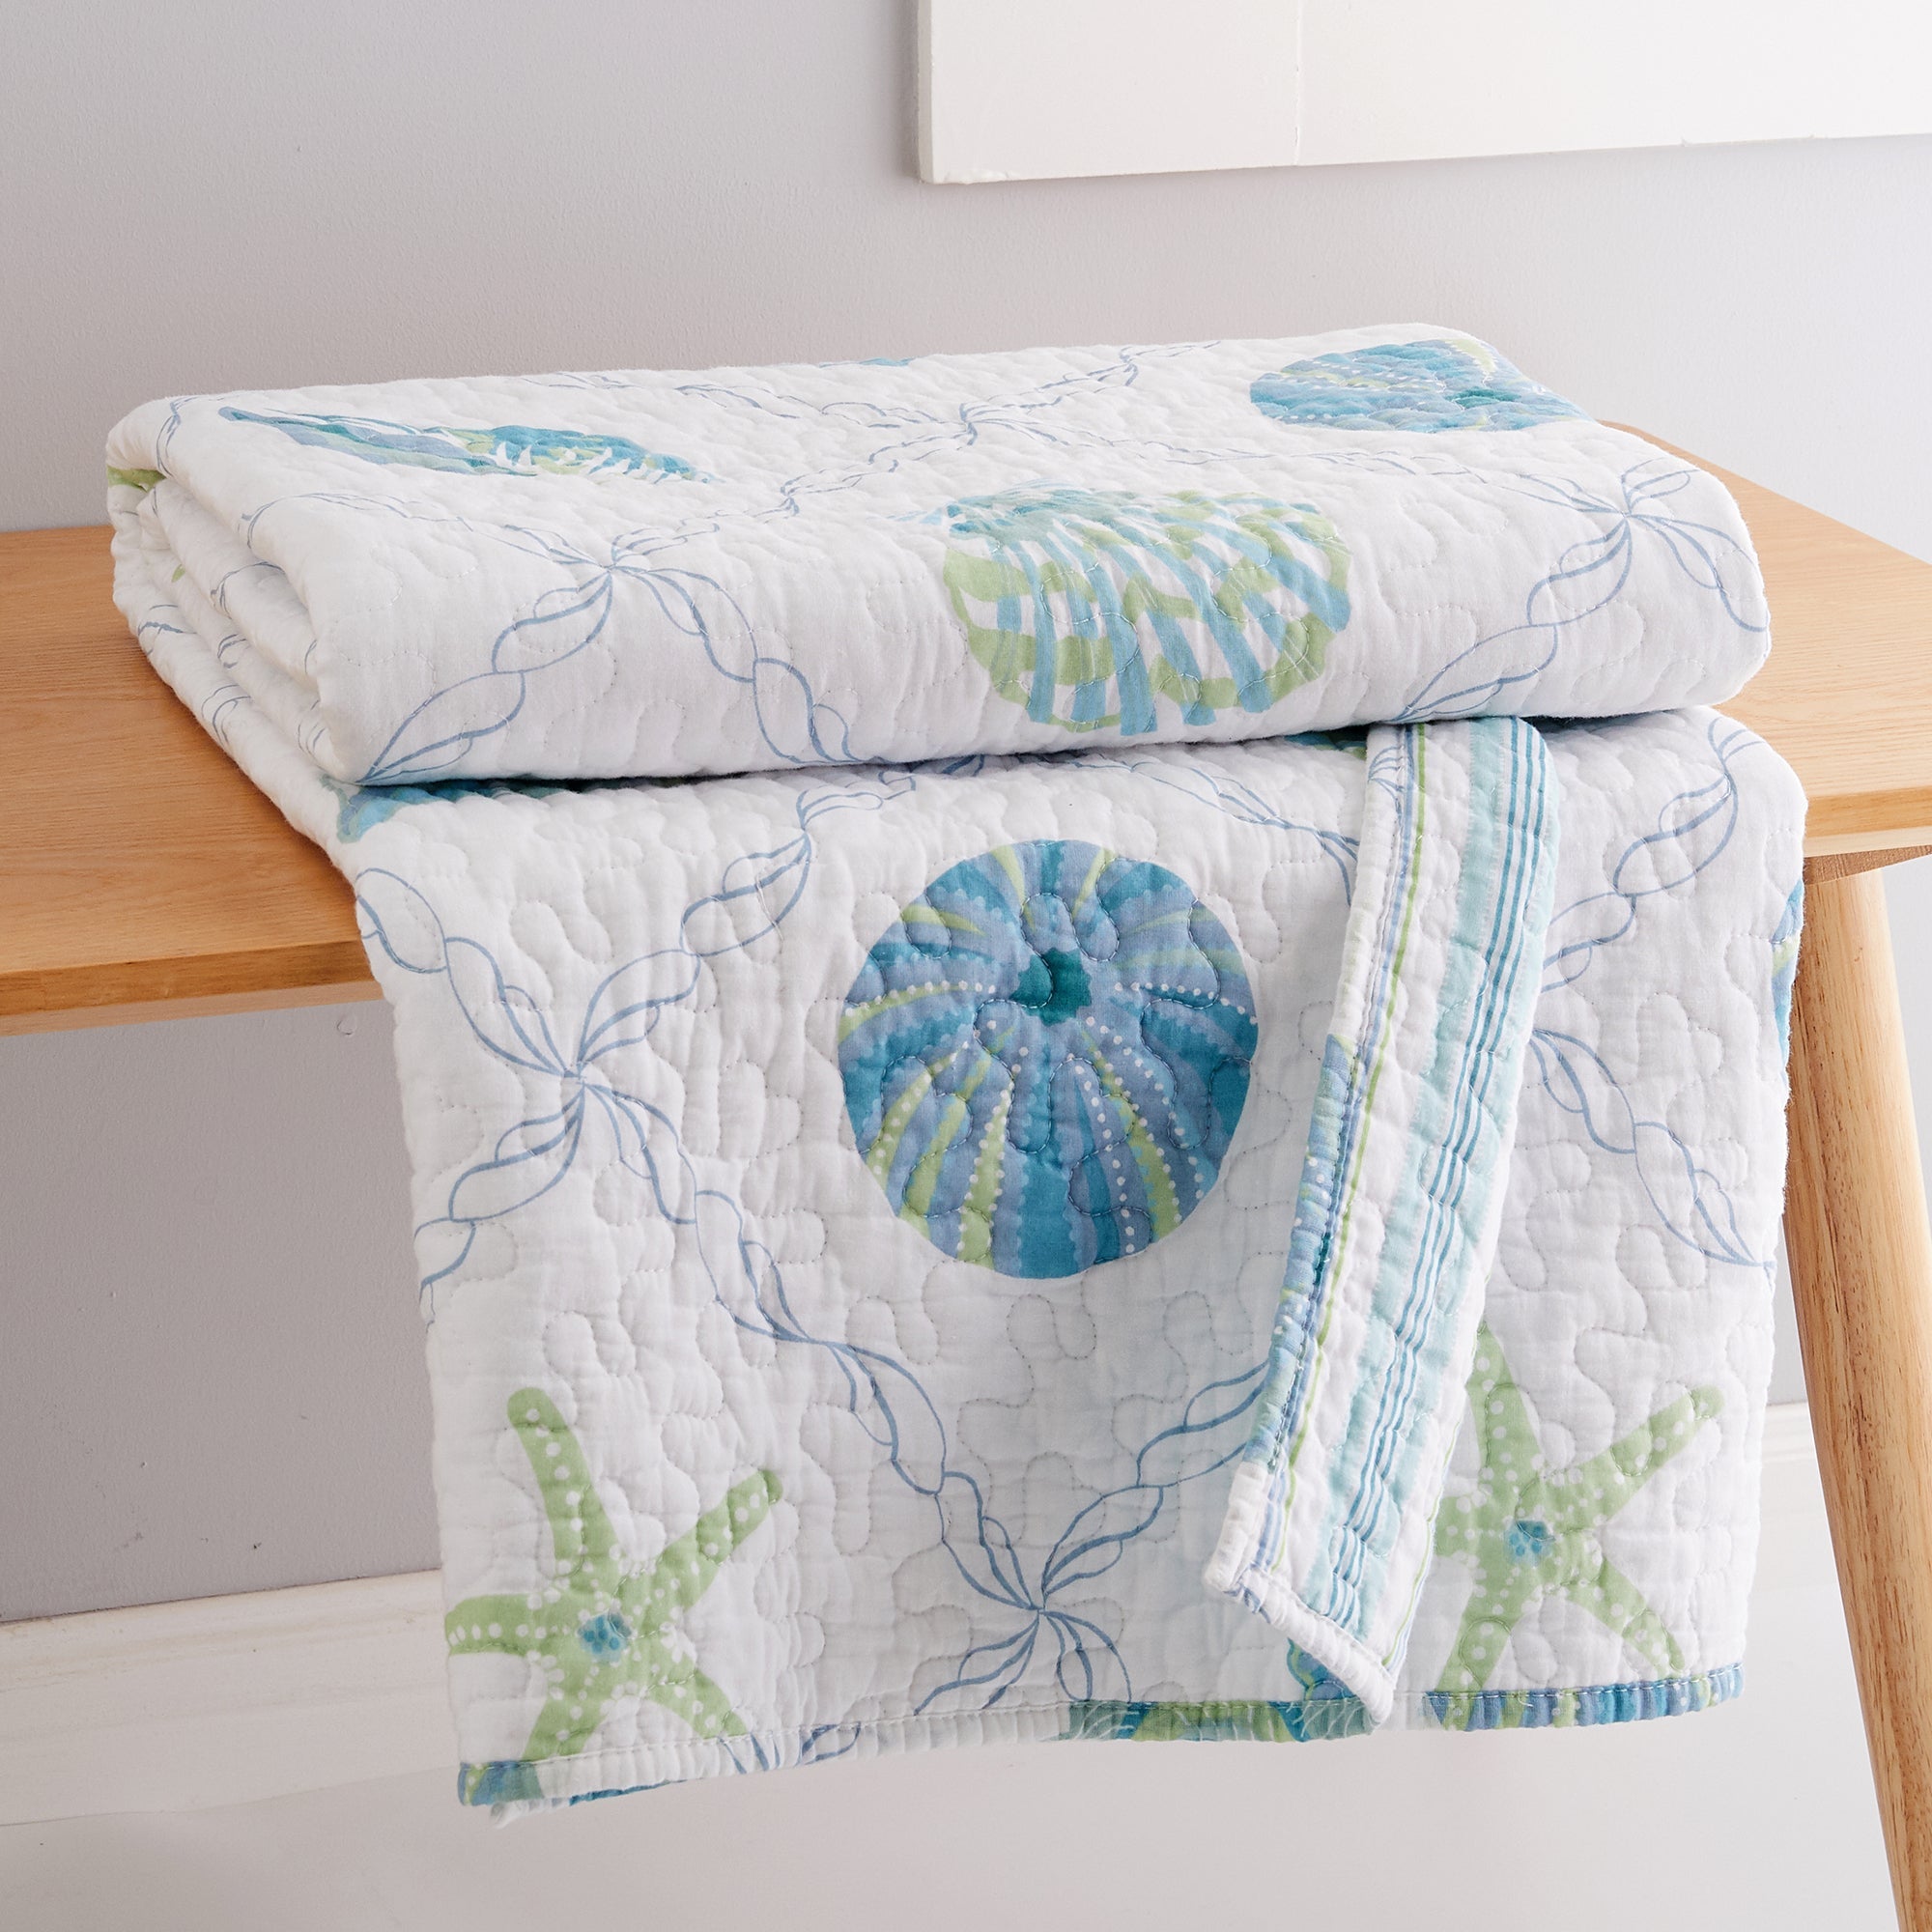 Marine Dream Seaglass Quilted Throw